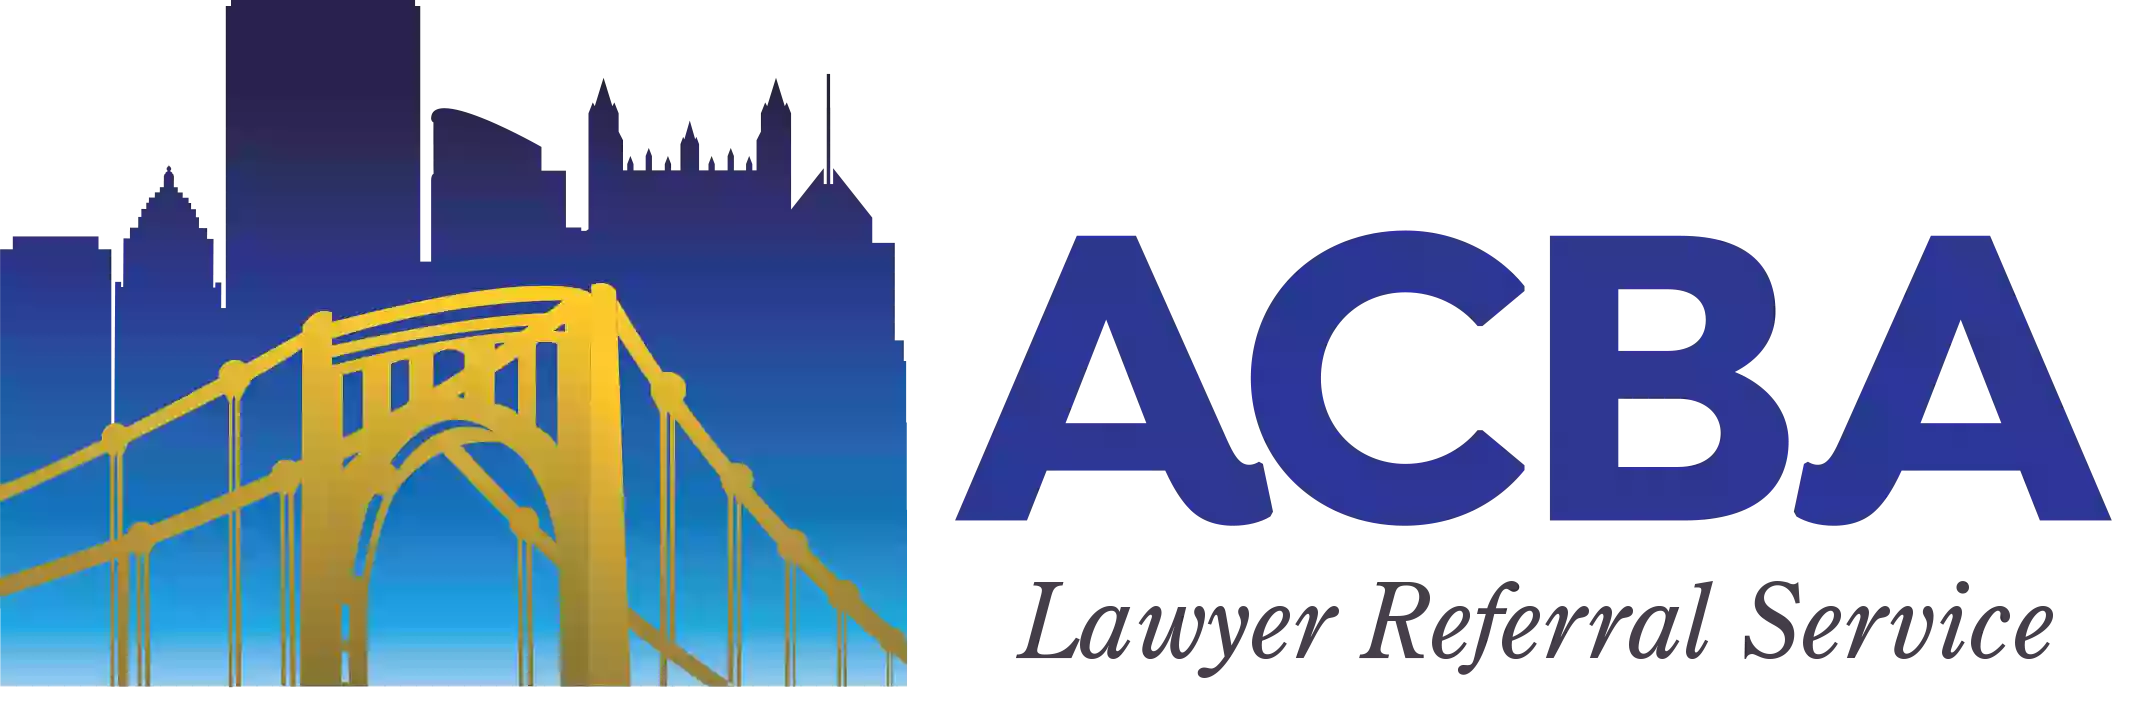 Lawyer Referral Services